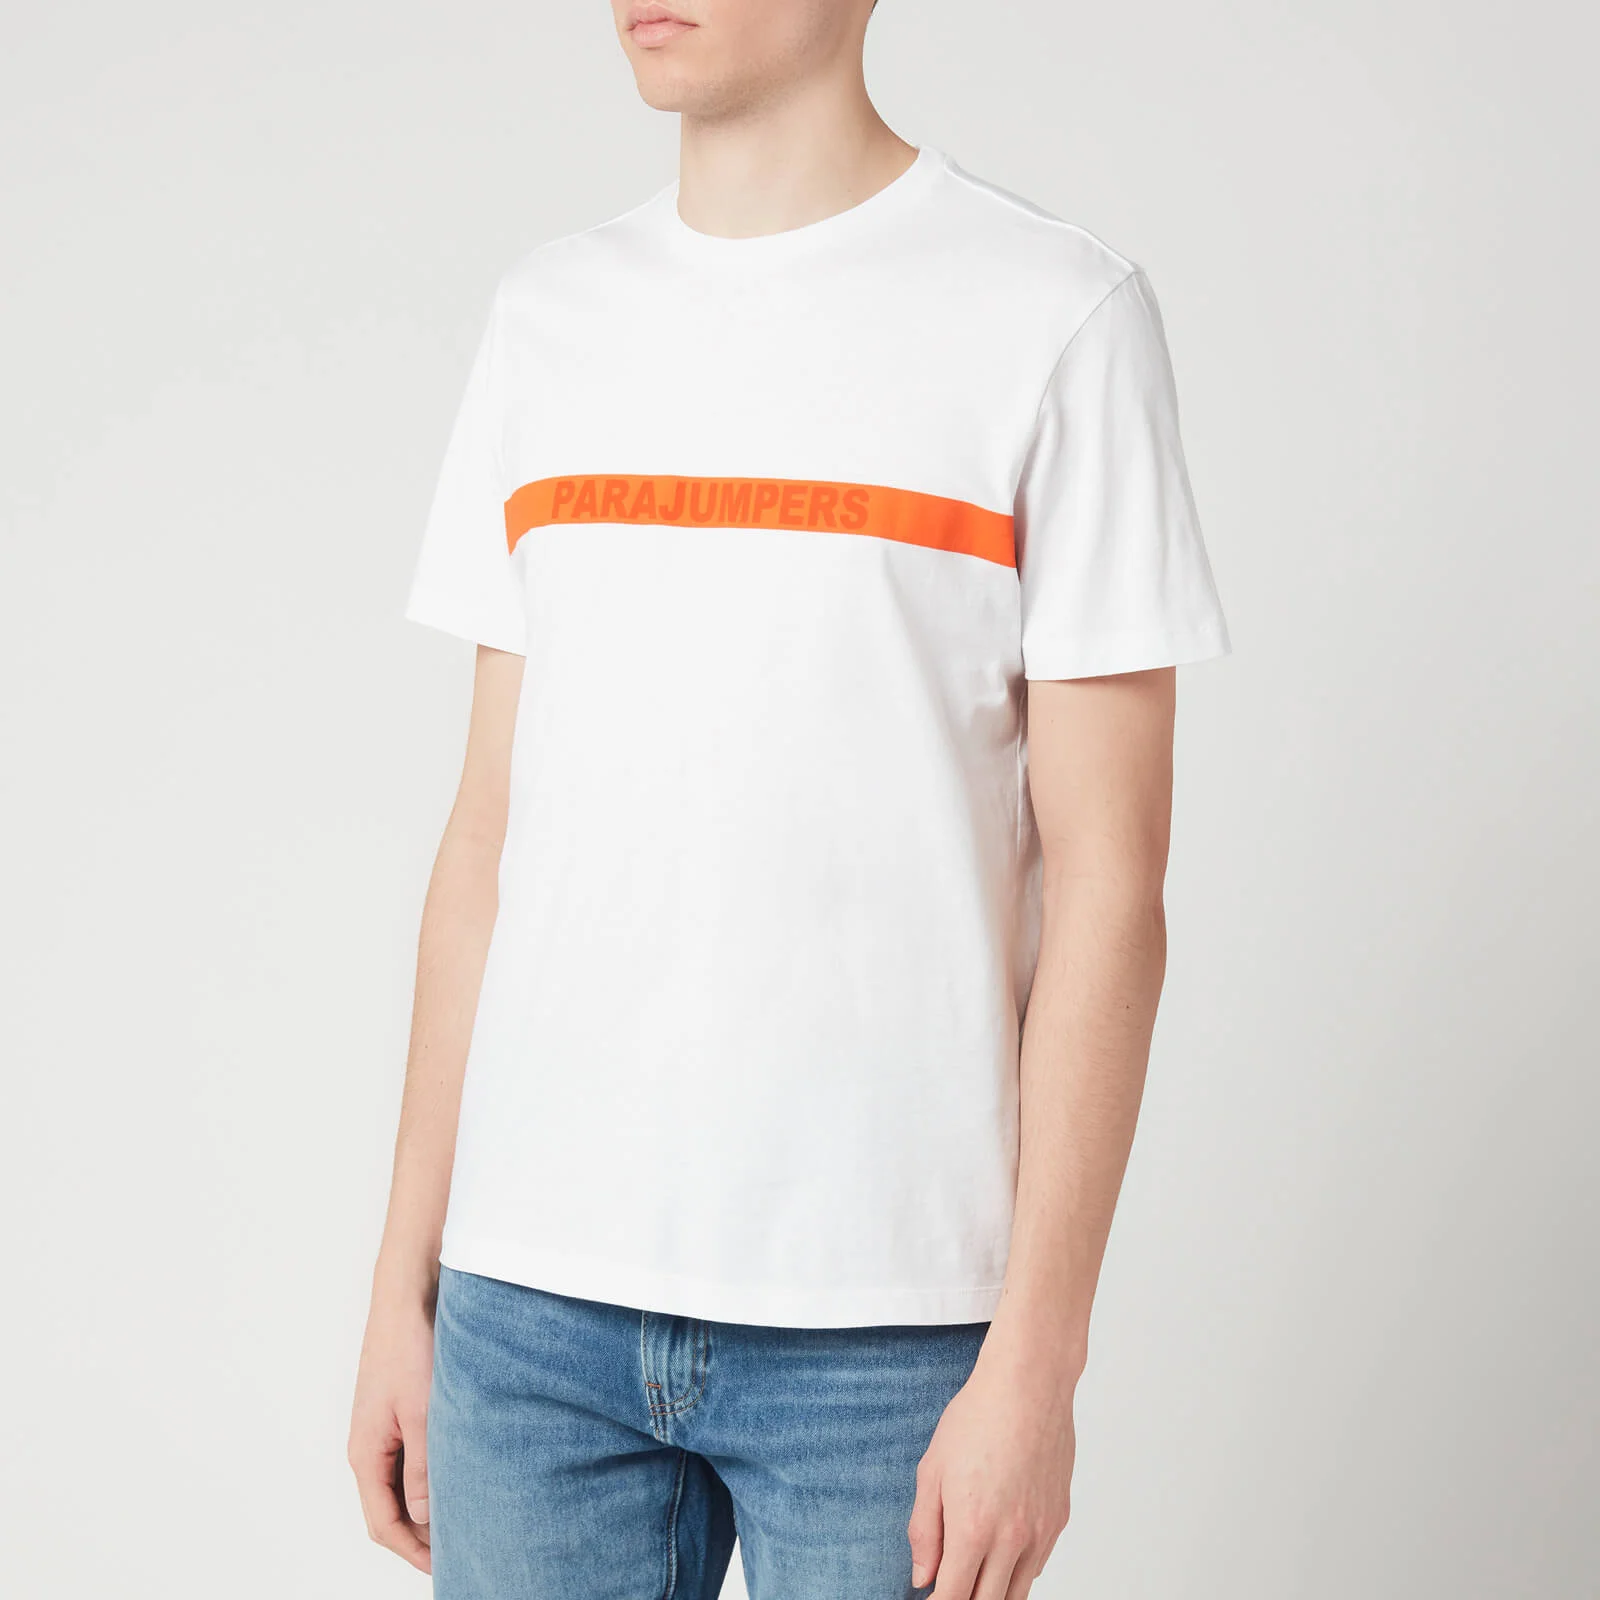 Parajumpers Men's Spike T-Shirt - White Image 1